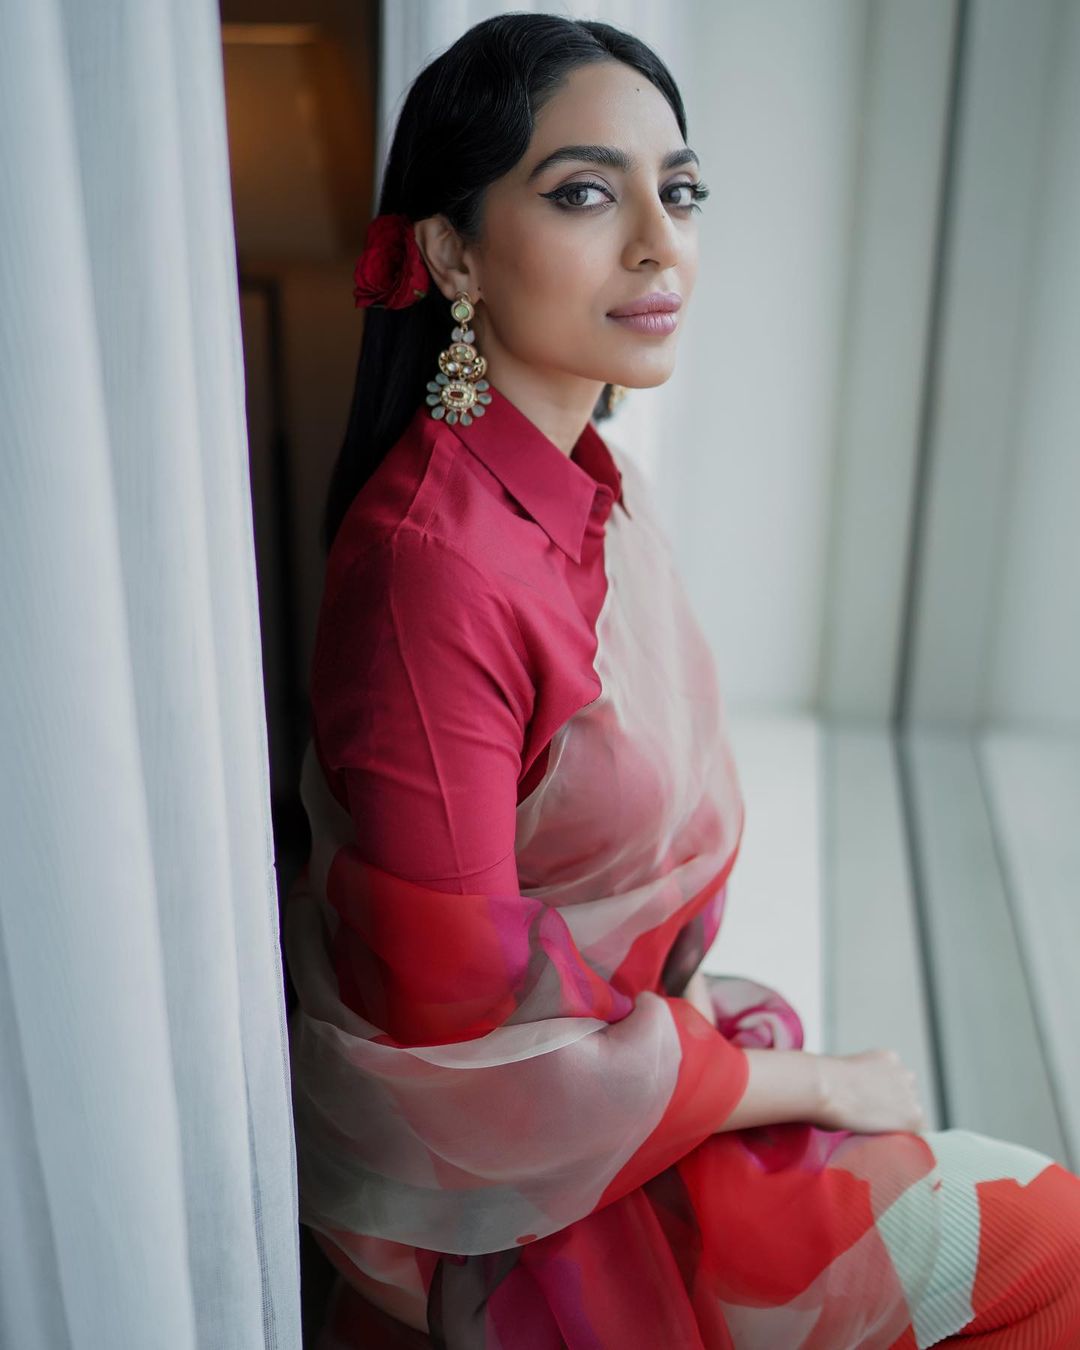 Sobhita Dhulipala in pink dress with white dupatta and drop earrings posing for camera - Most beautiful Indian Girls